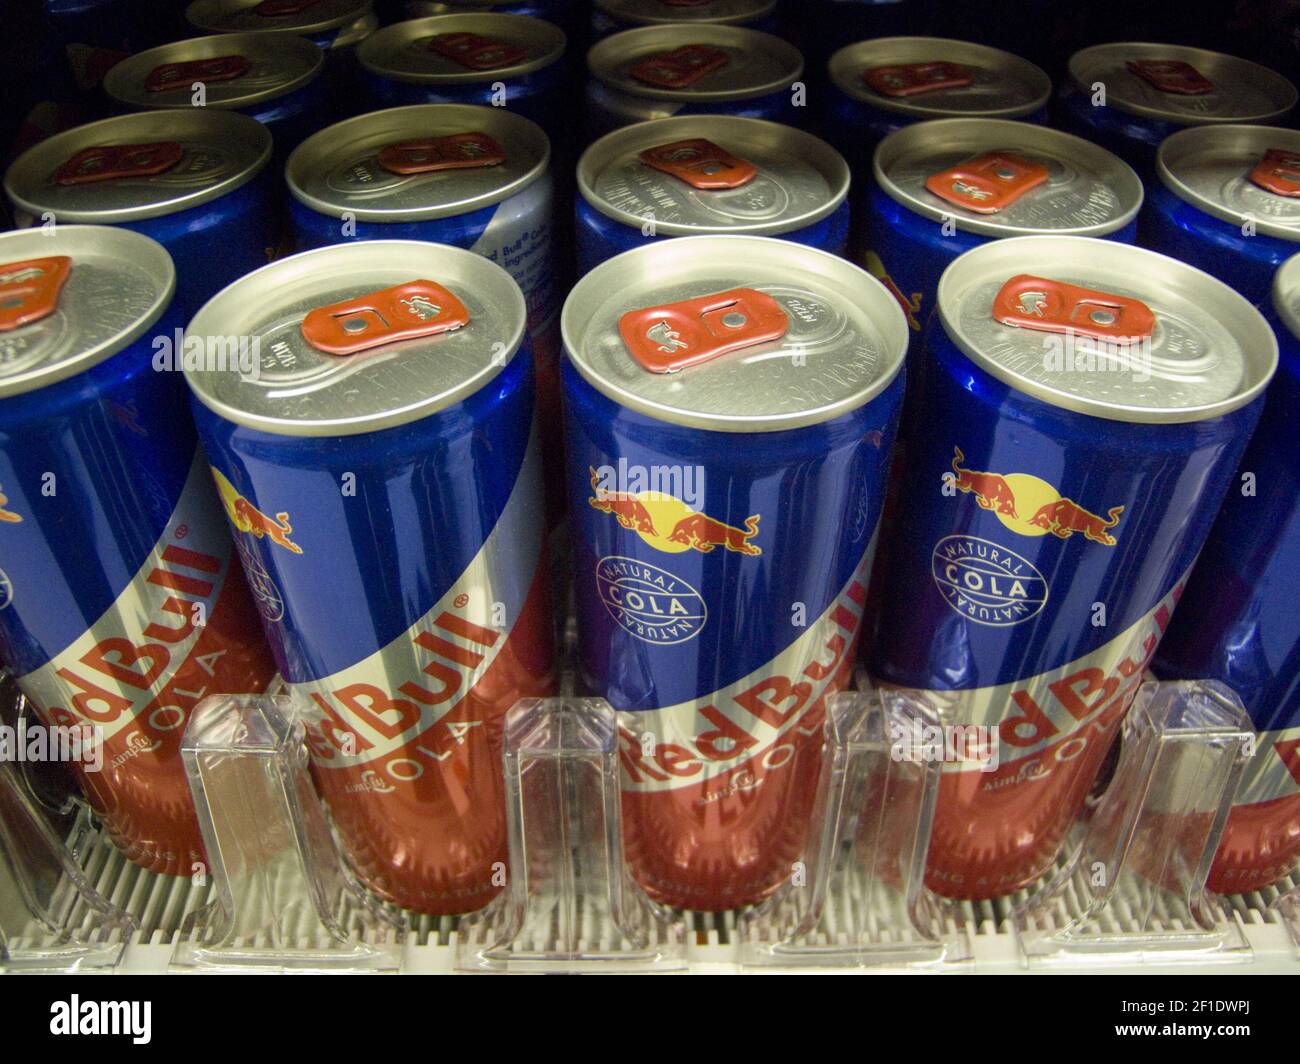 https://c8.alamy.com/comp/2F1DWPJ/red-bull-cola-energy-drink-on-a-supermarket-shelf-on-friday-january-9-2009-the-energy-drinks-which-were-originally-marketed-to-clubbers-and-extreme-sports-enthusiasts-have-entered-the-mainstream-appealing-to-health-minded-consumers-the-drinks-are-very-high-in-caffeine-and-contain-other-ingredients-deemed-exotic-such-as-taurine-glucosamine-and-ginseng-the-health-benefits-of-the-ingredients-has-not-been-clinically-proven-photo-by-richard-b-levine-2F1DWPJ.jpg